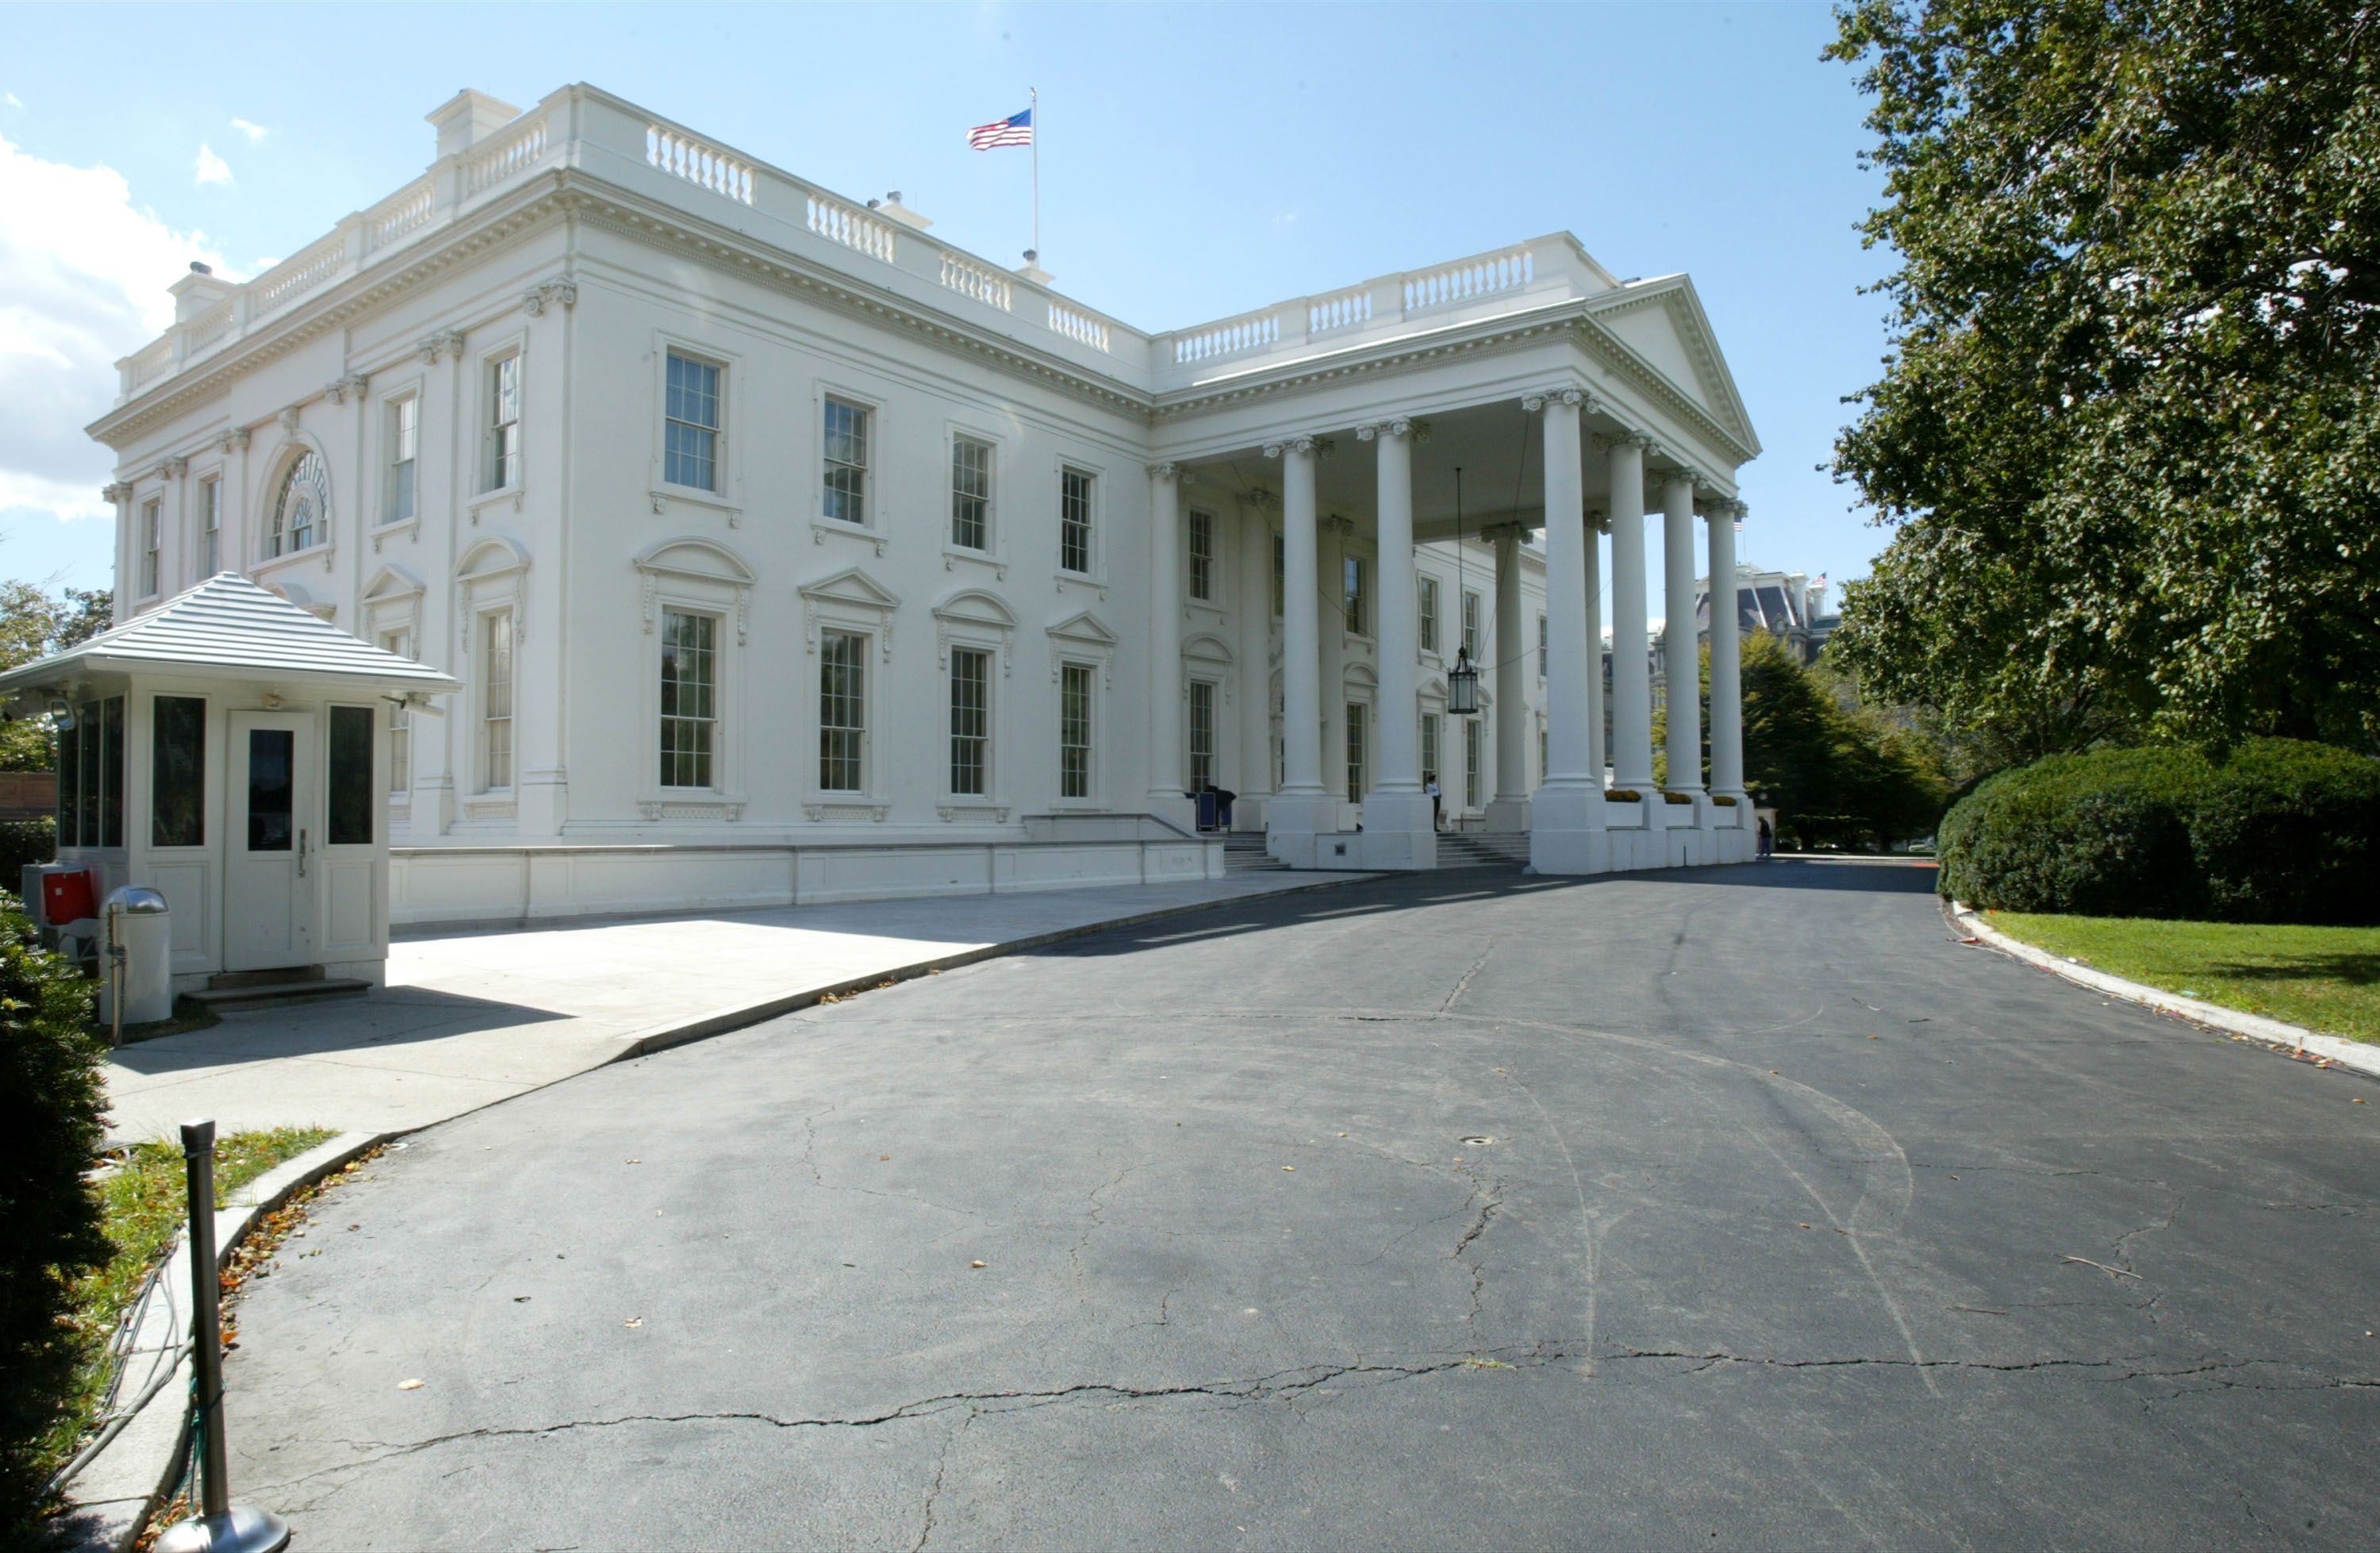 10 Facts About The White House Move In How New Presidents Move Into The White House